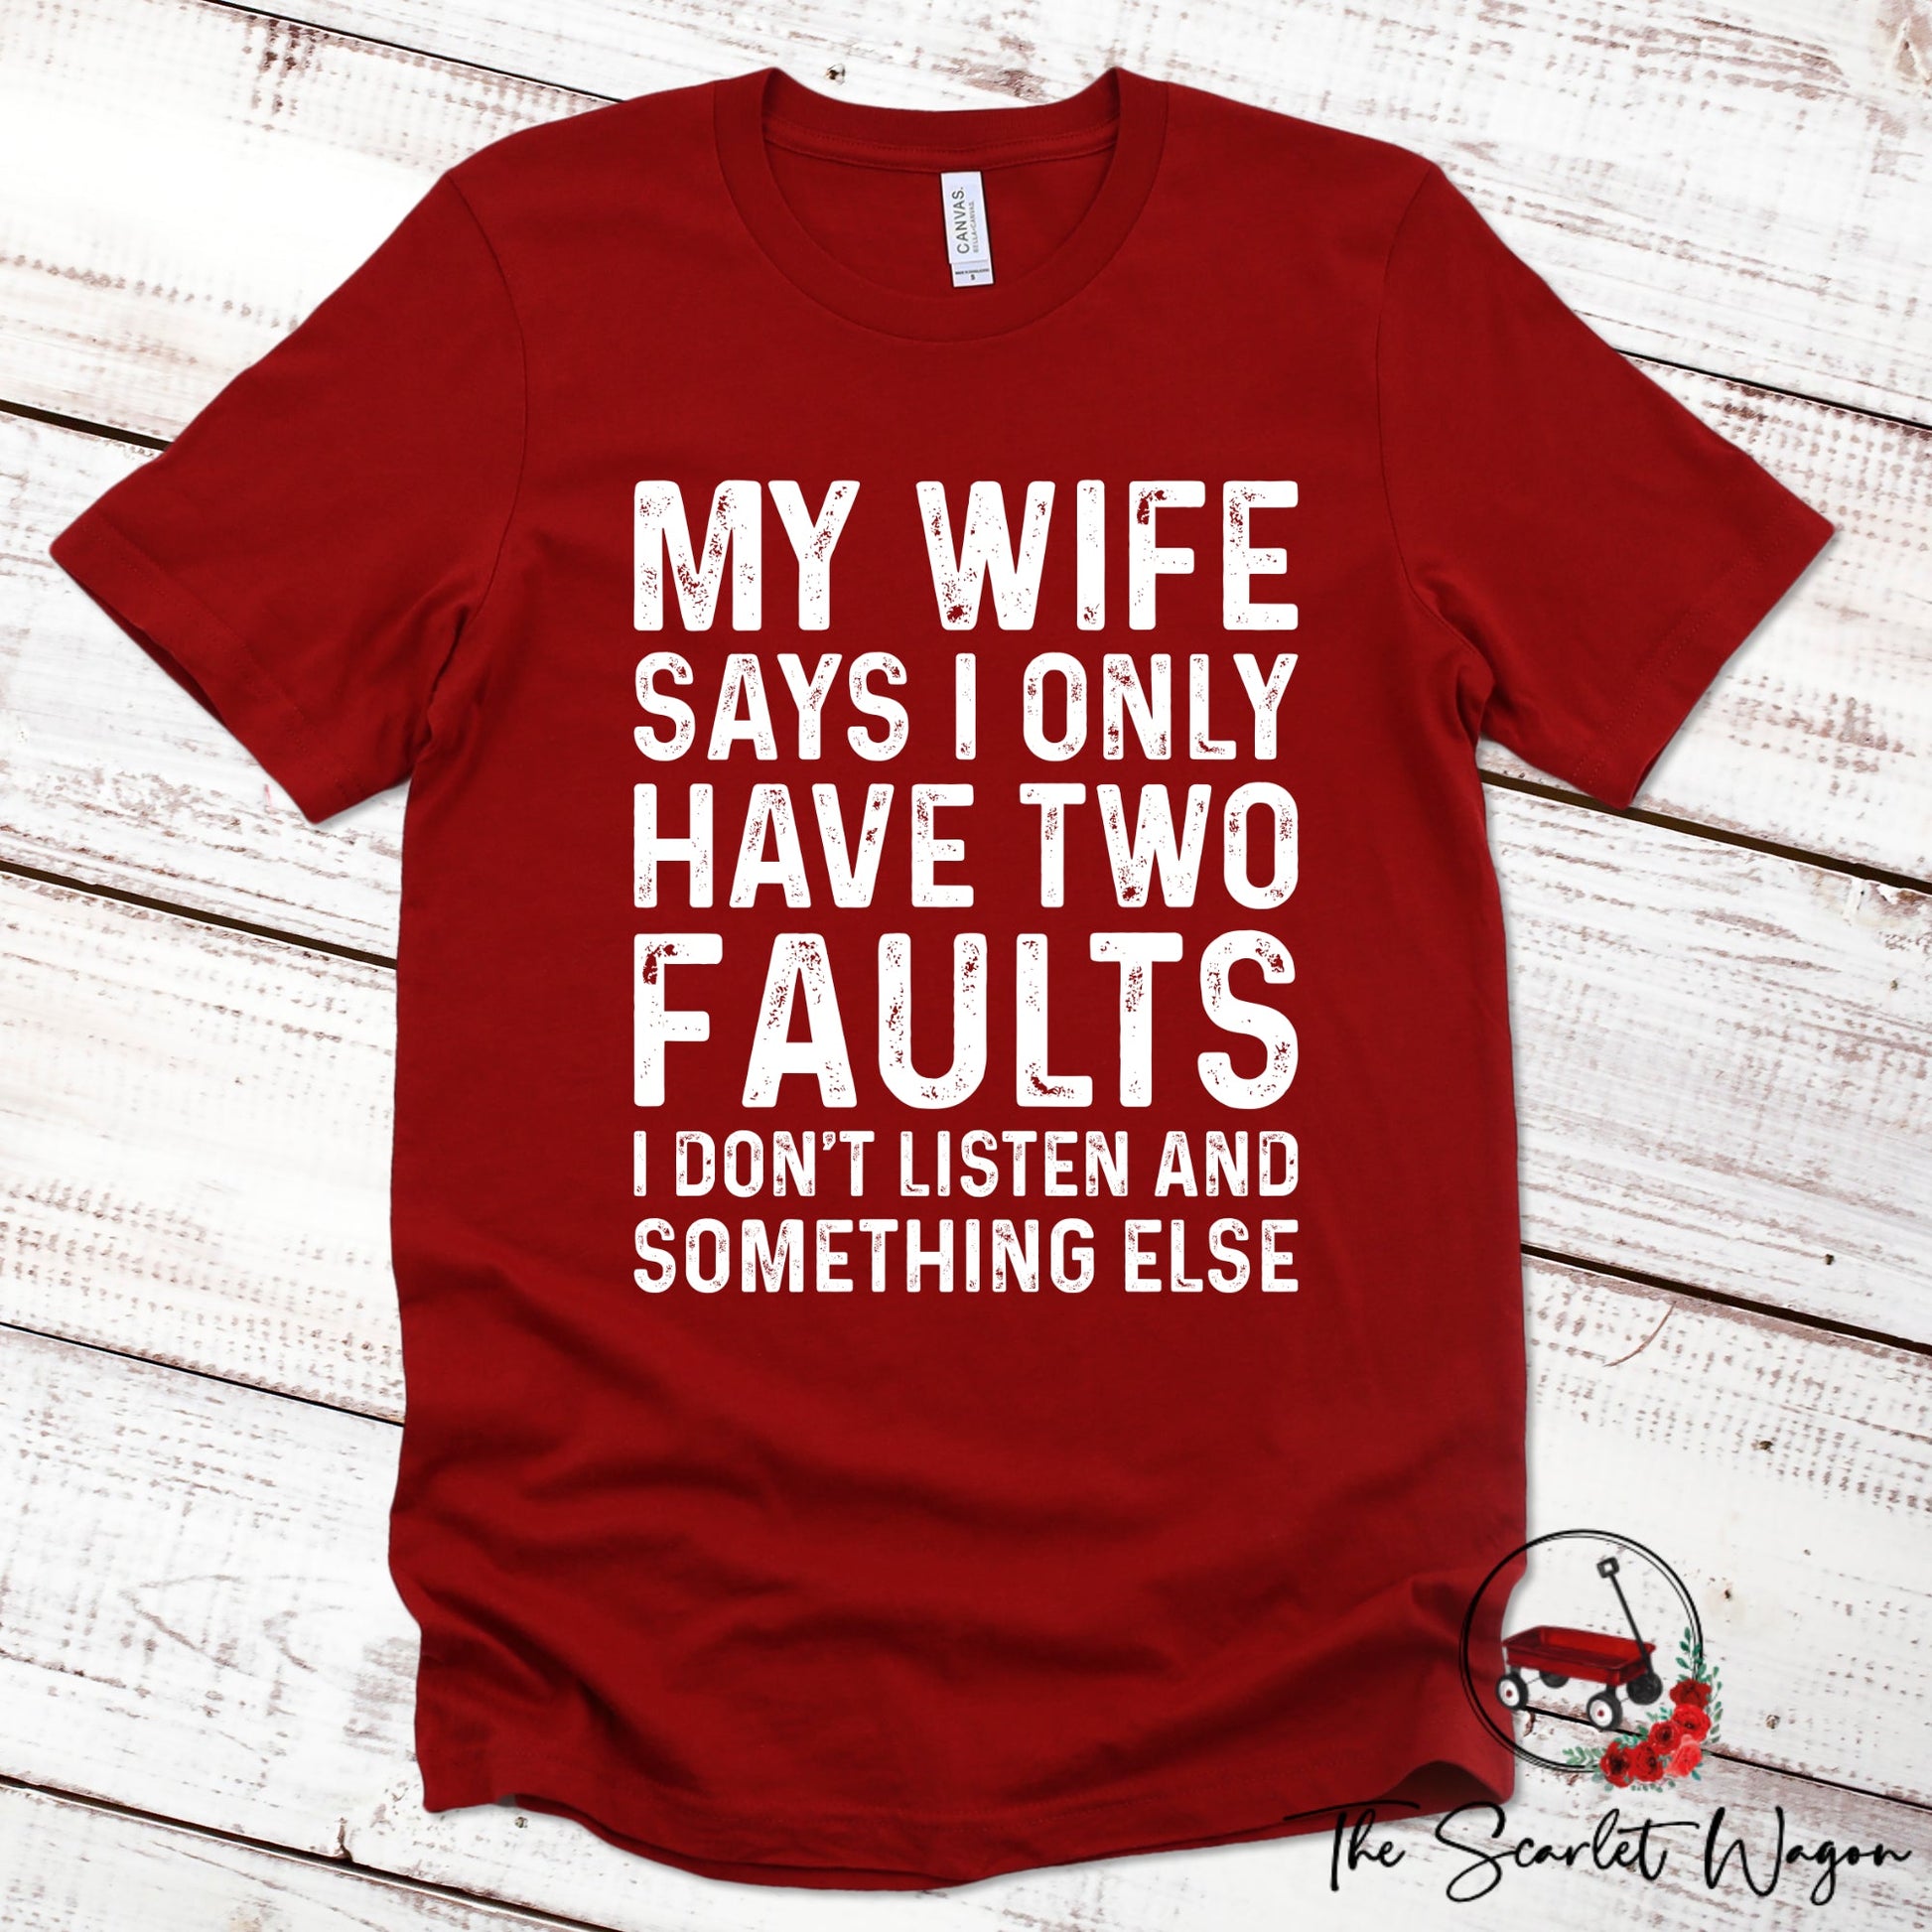 My Wife Says I Have Two Faults Premium Tee Scarlet Wagon Red XS 